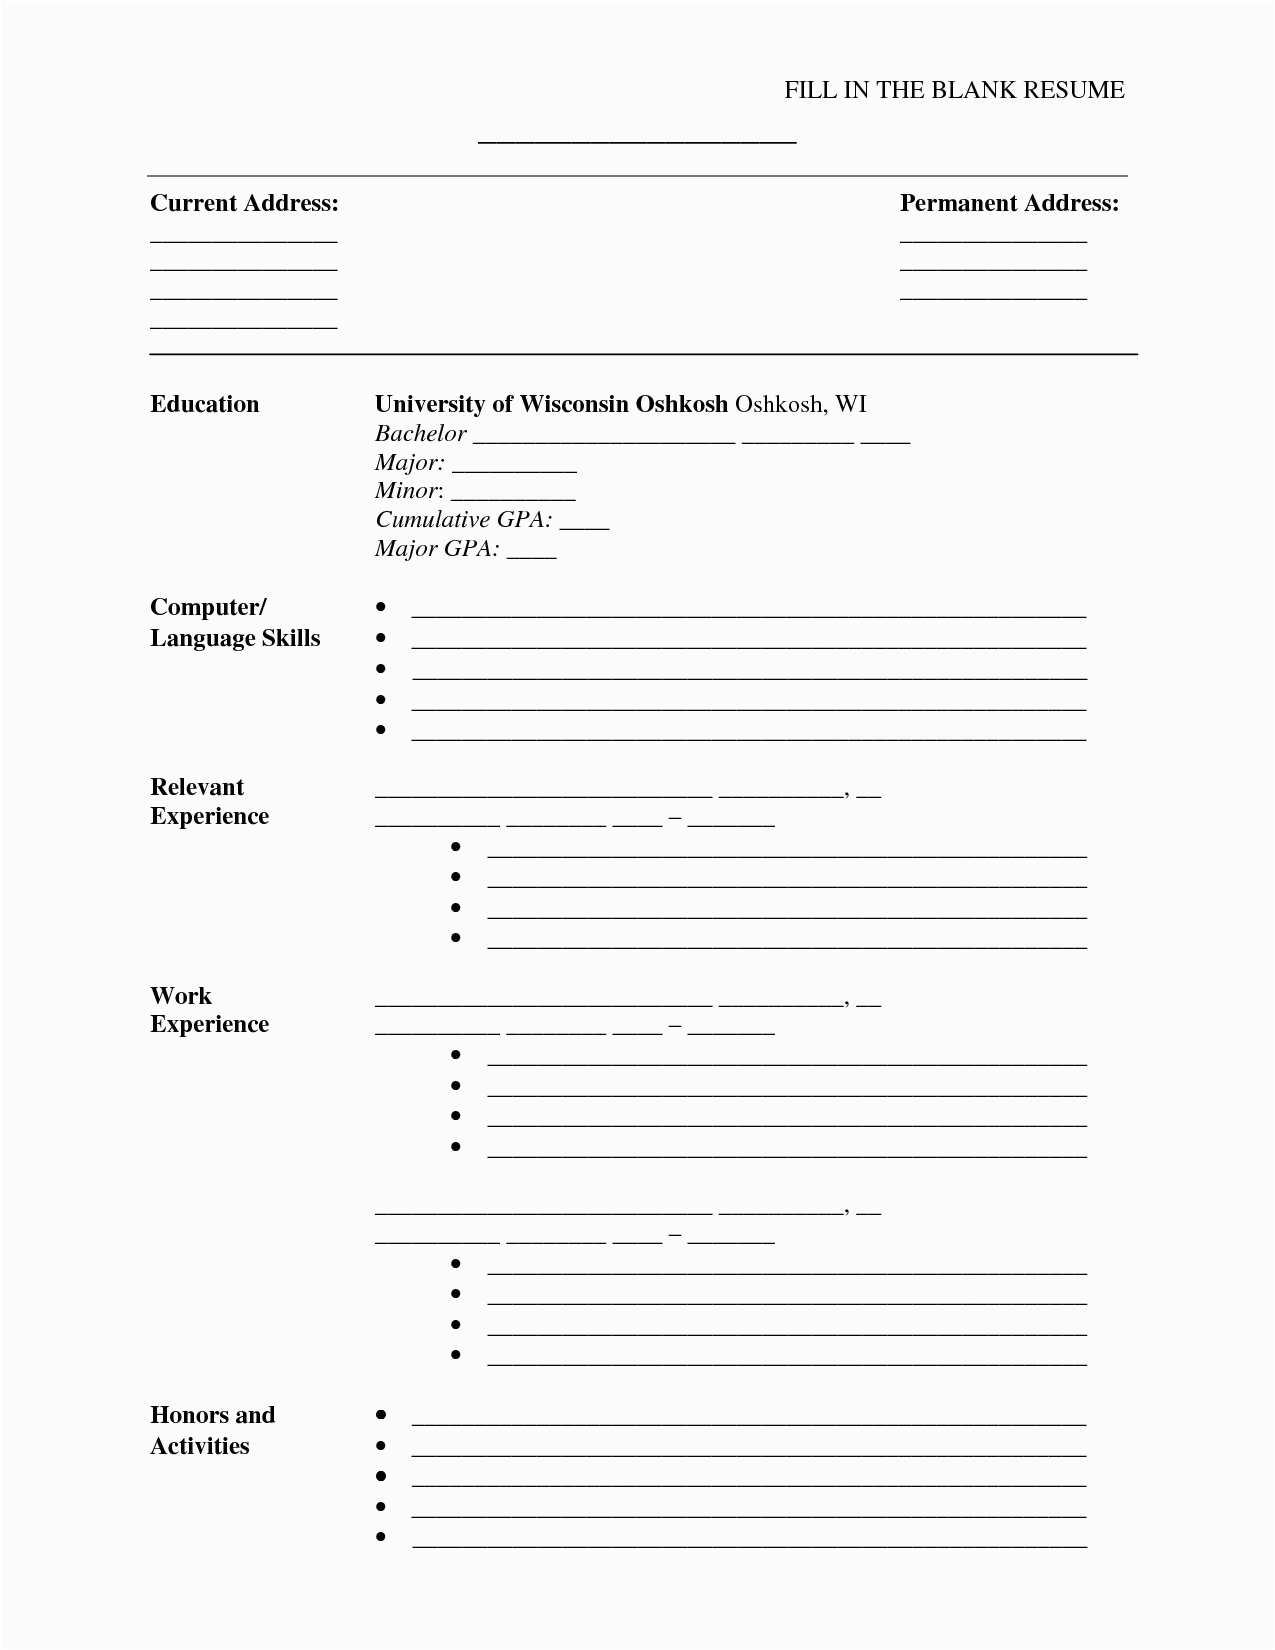 Resume Templates Fill In the Blanks Free Fill In the Blank Resume Pdf Umecareer